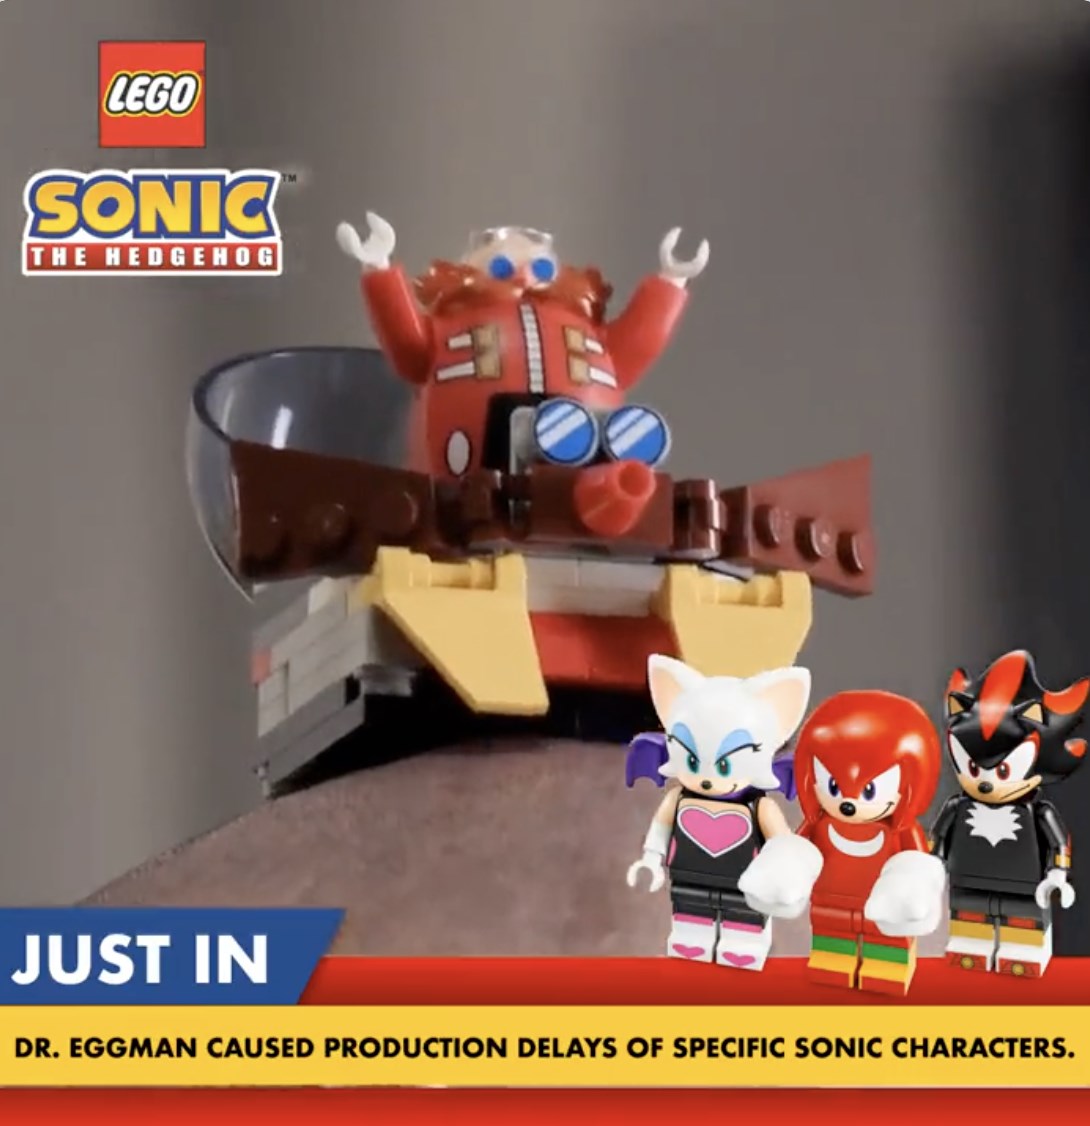 Lego Sonic The Hedgehog gets four amazing new sets and minifigures